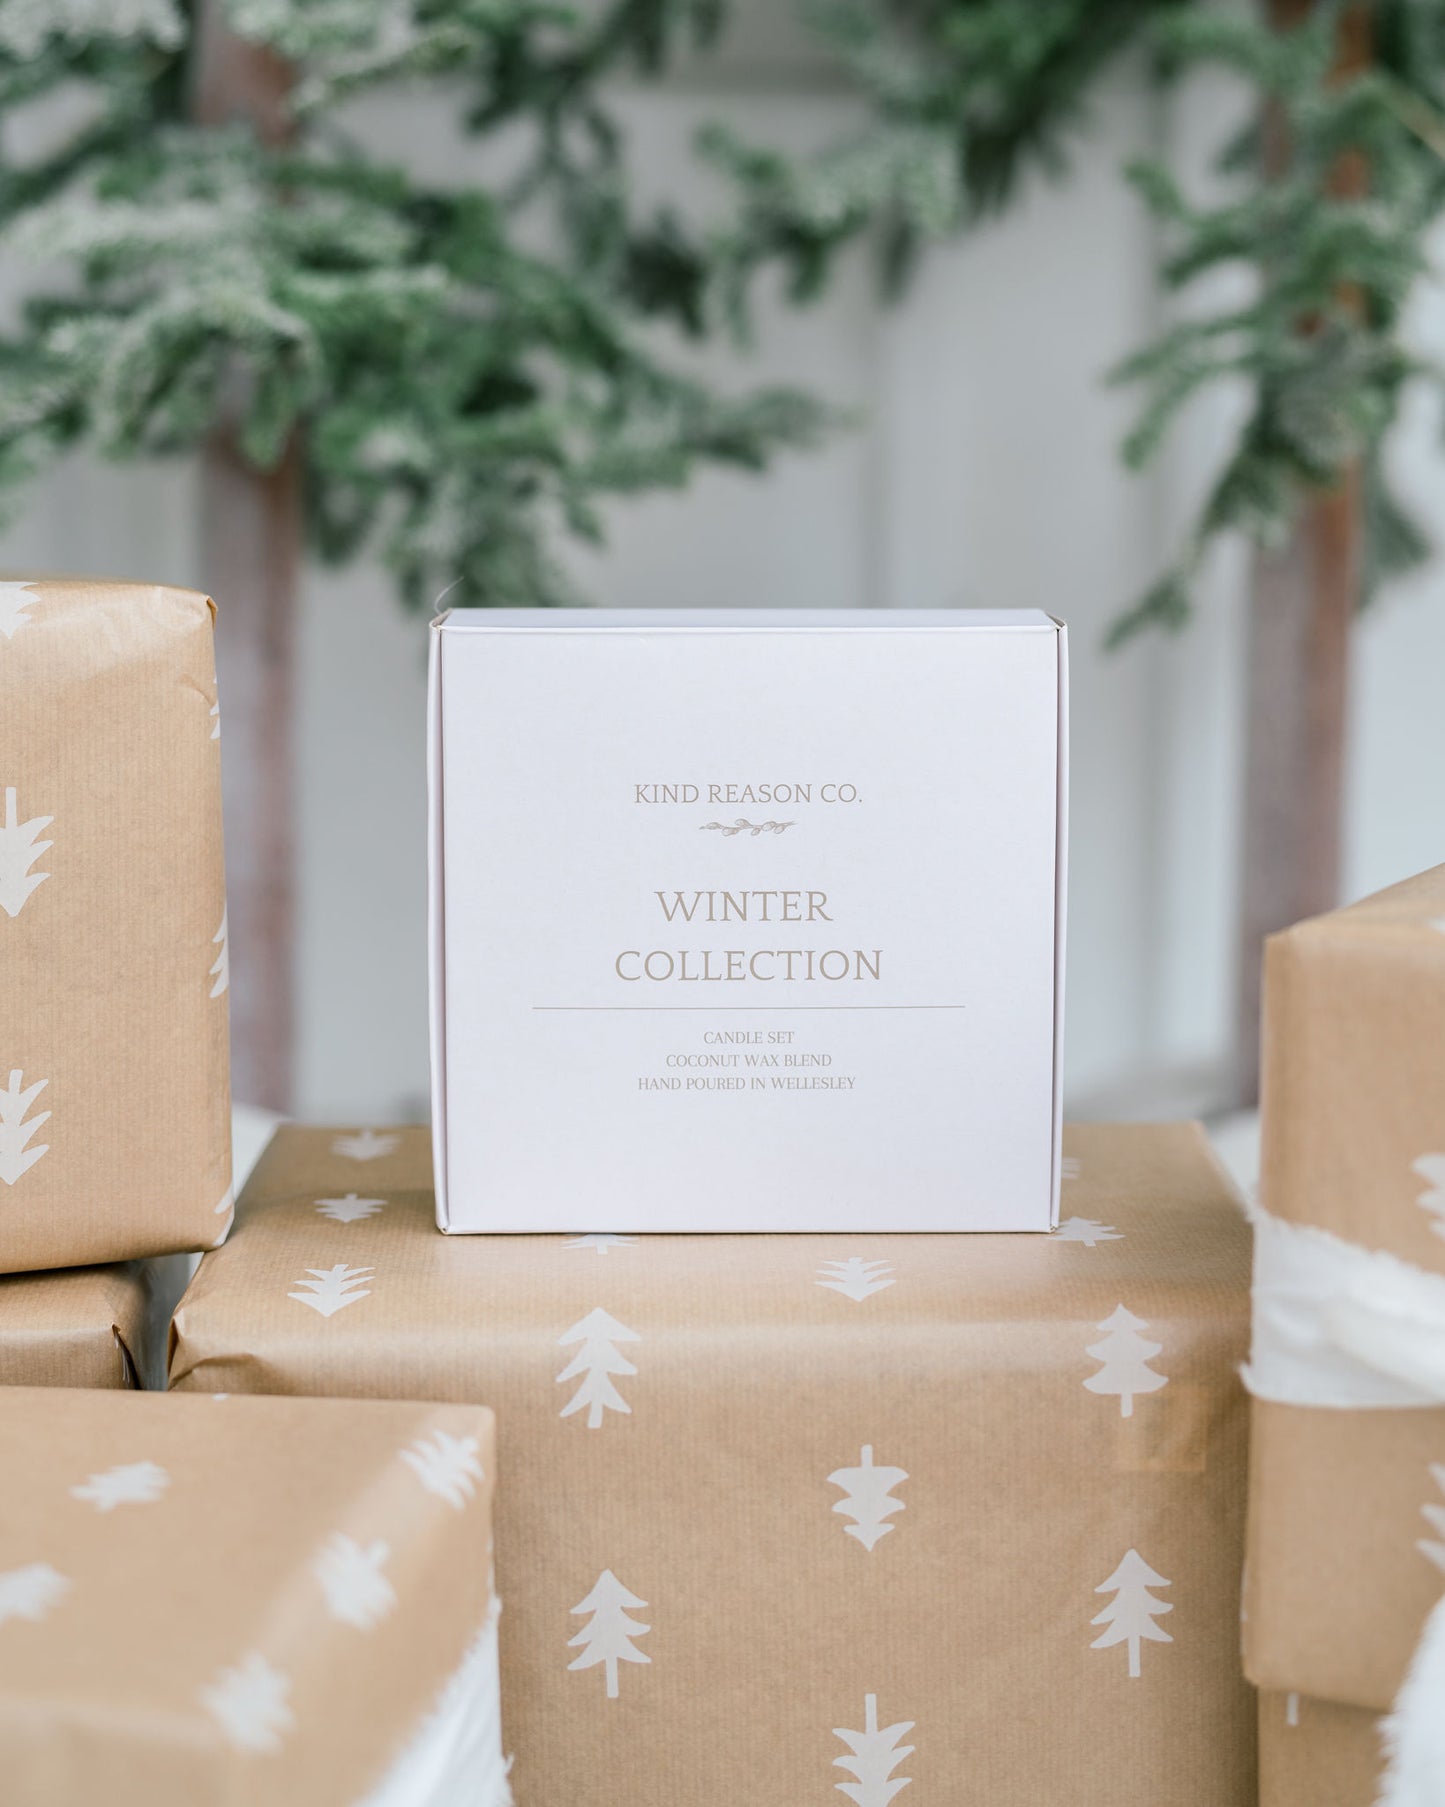 The Winter Collection Box